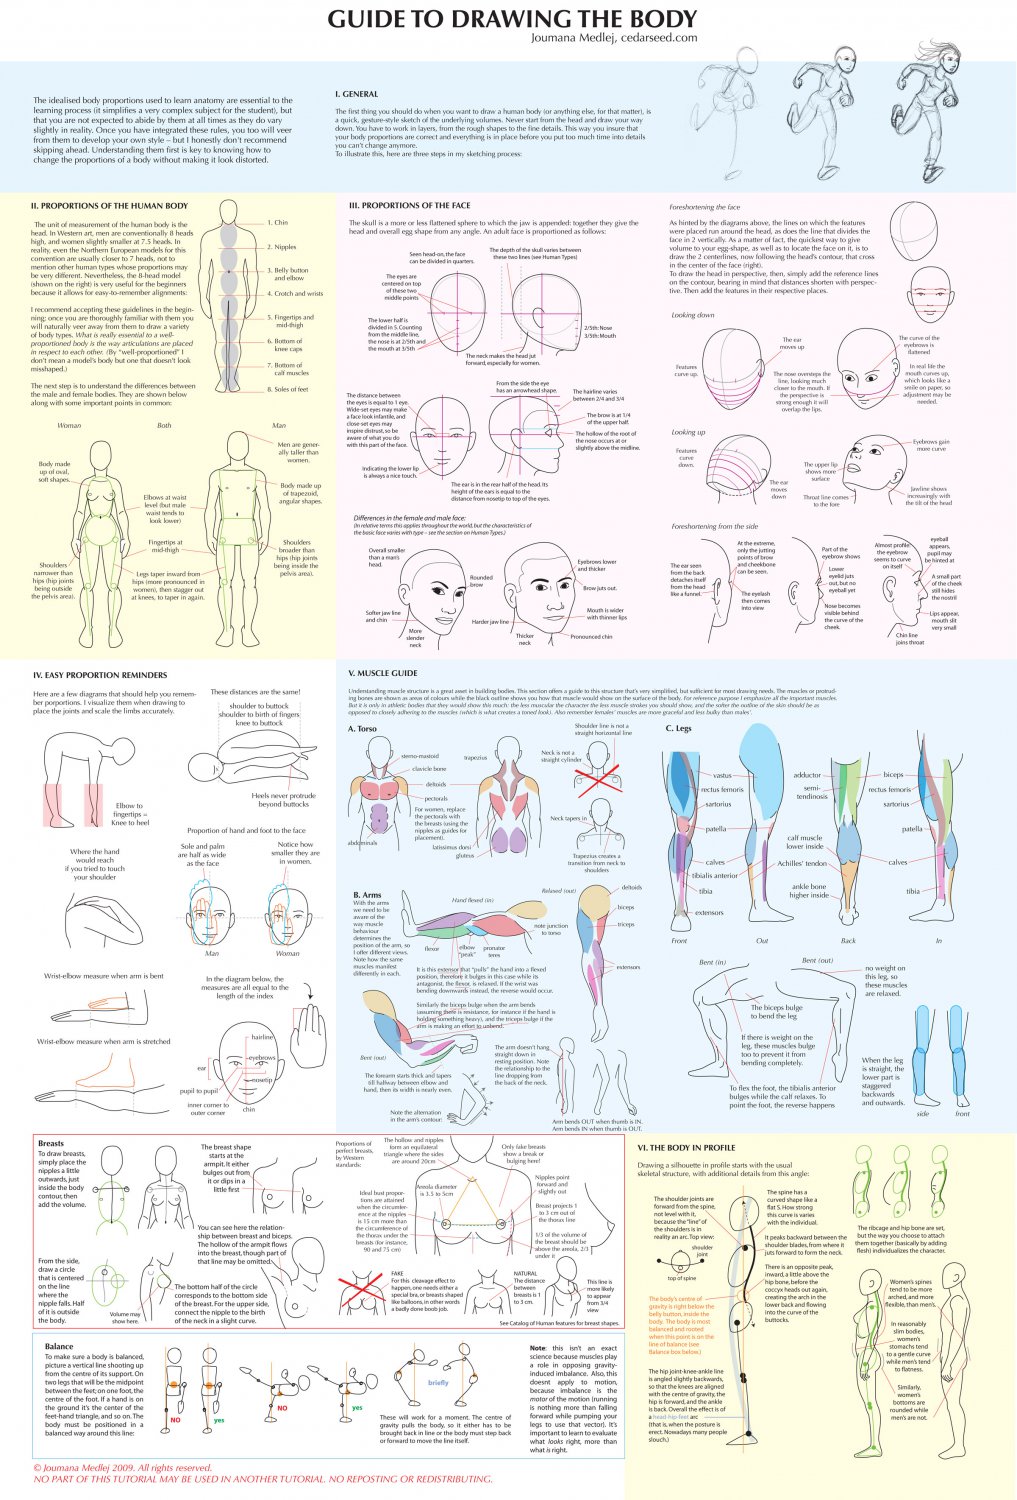 Big Guide to Drawing the Body 18"x28" (45cm/70cm) Canvas Print